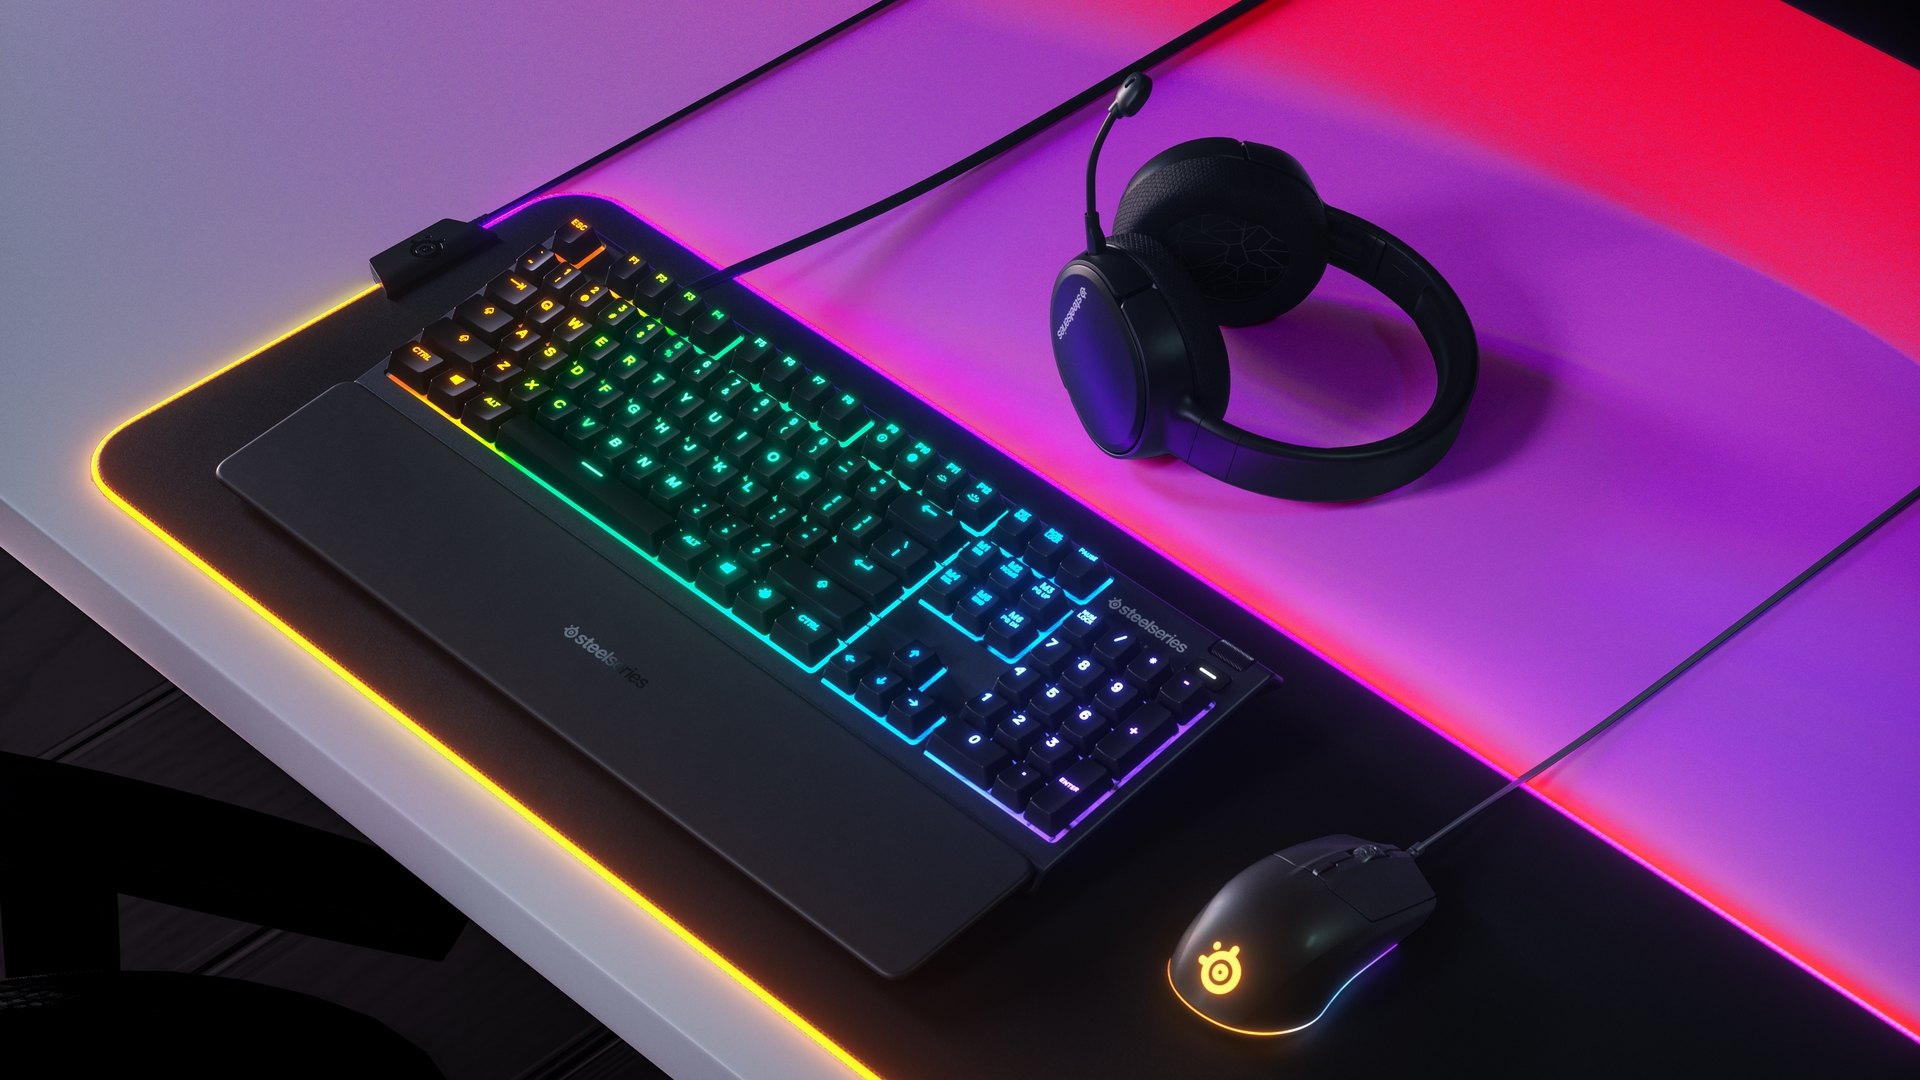 SteelSeries Apex 3 TKL review: a heavy typing experience but